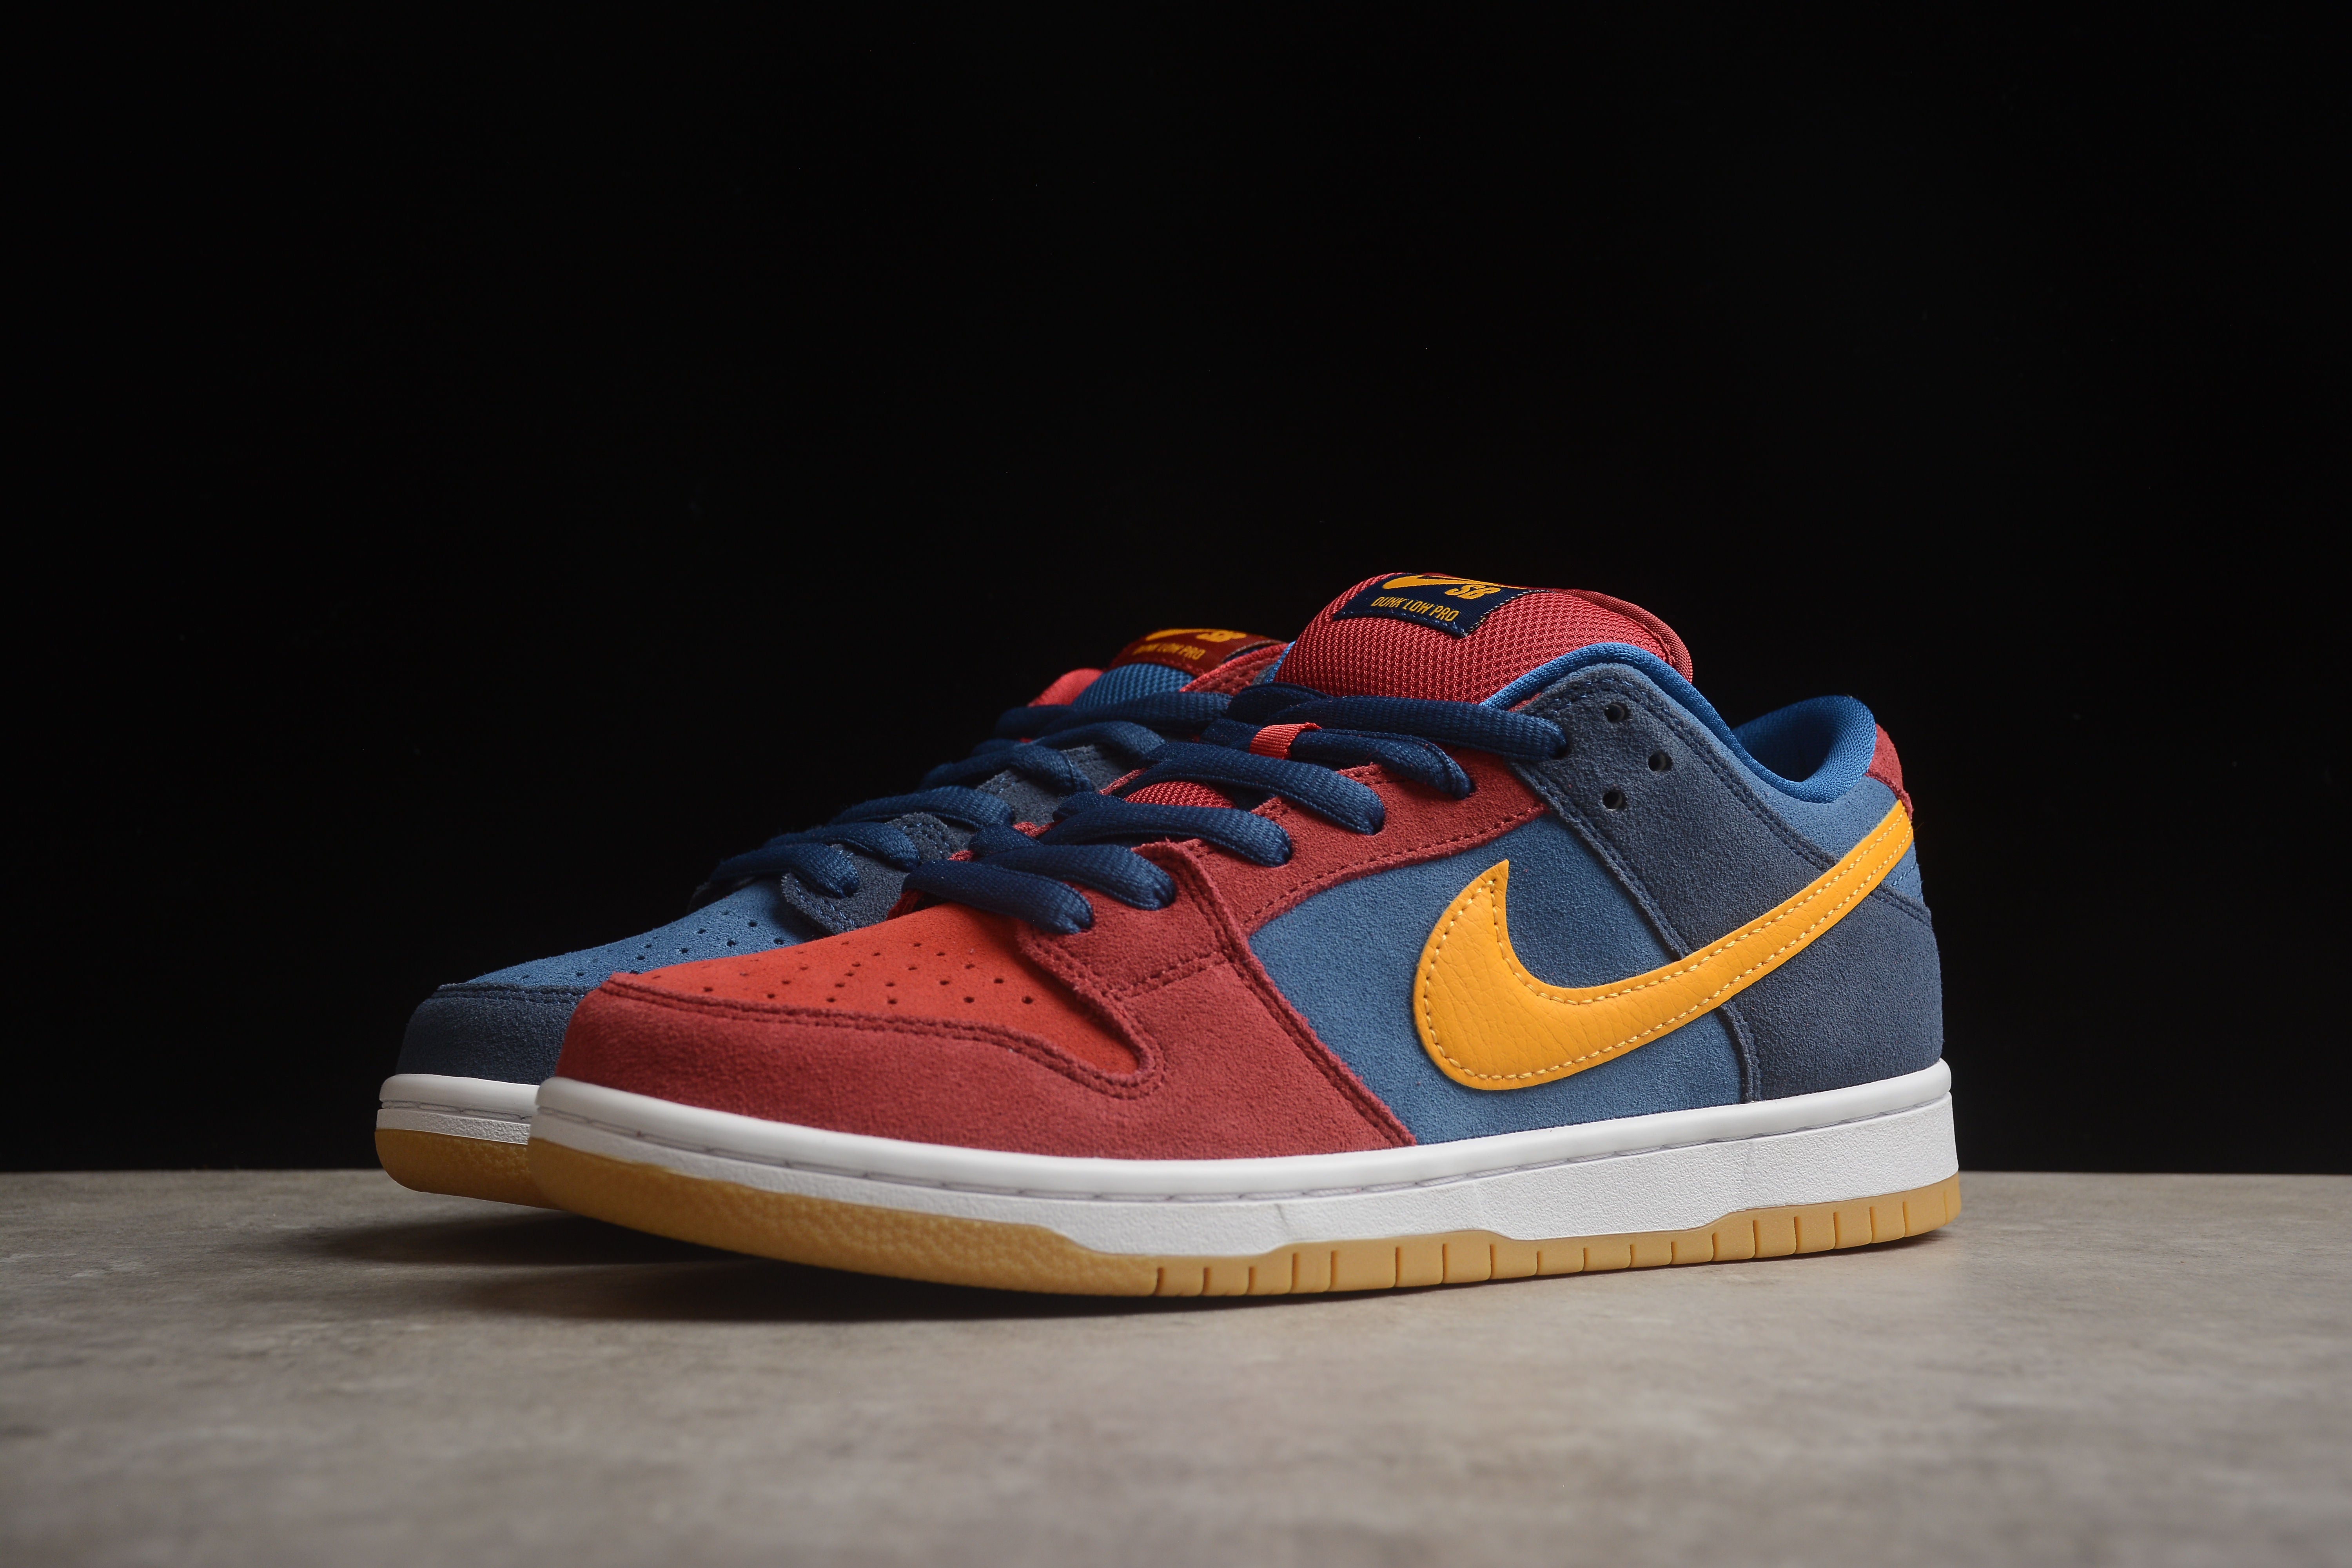 Nike SB dunk low red and blue mandarin shoes